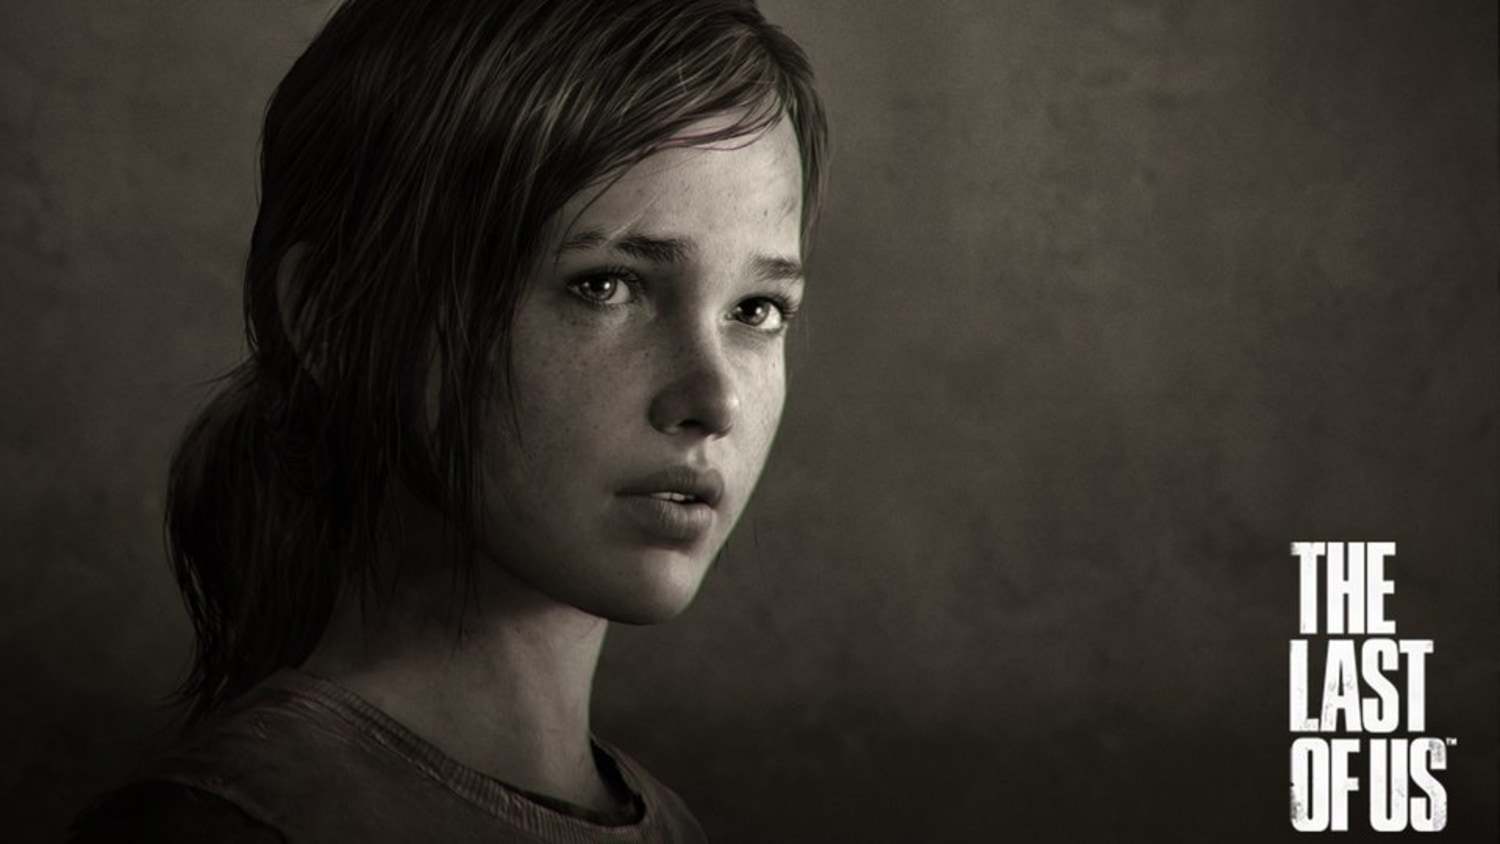 Ellen Page Says Naughty Dog 'Ripped Off' Her Likeness For 'The Last Of Us